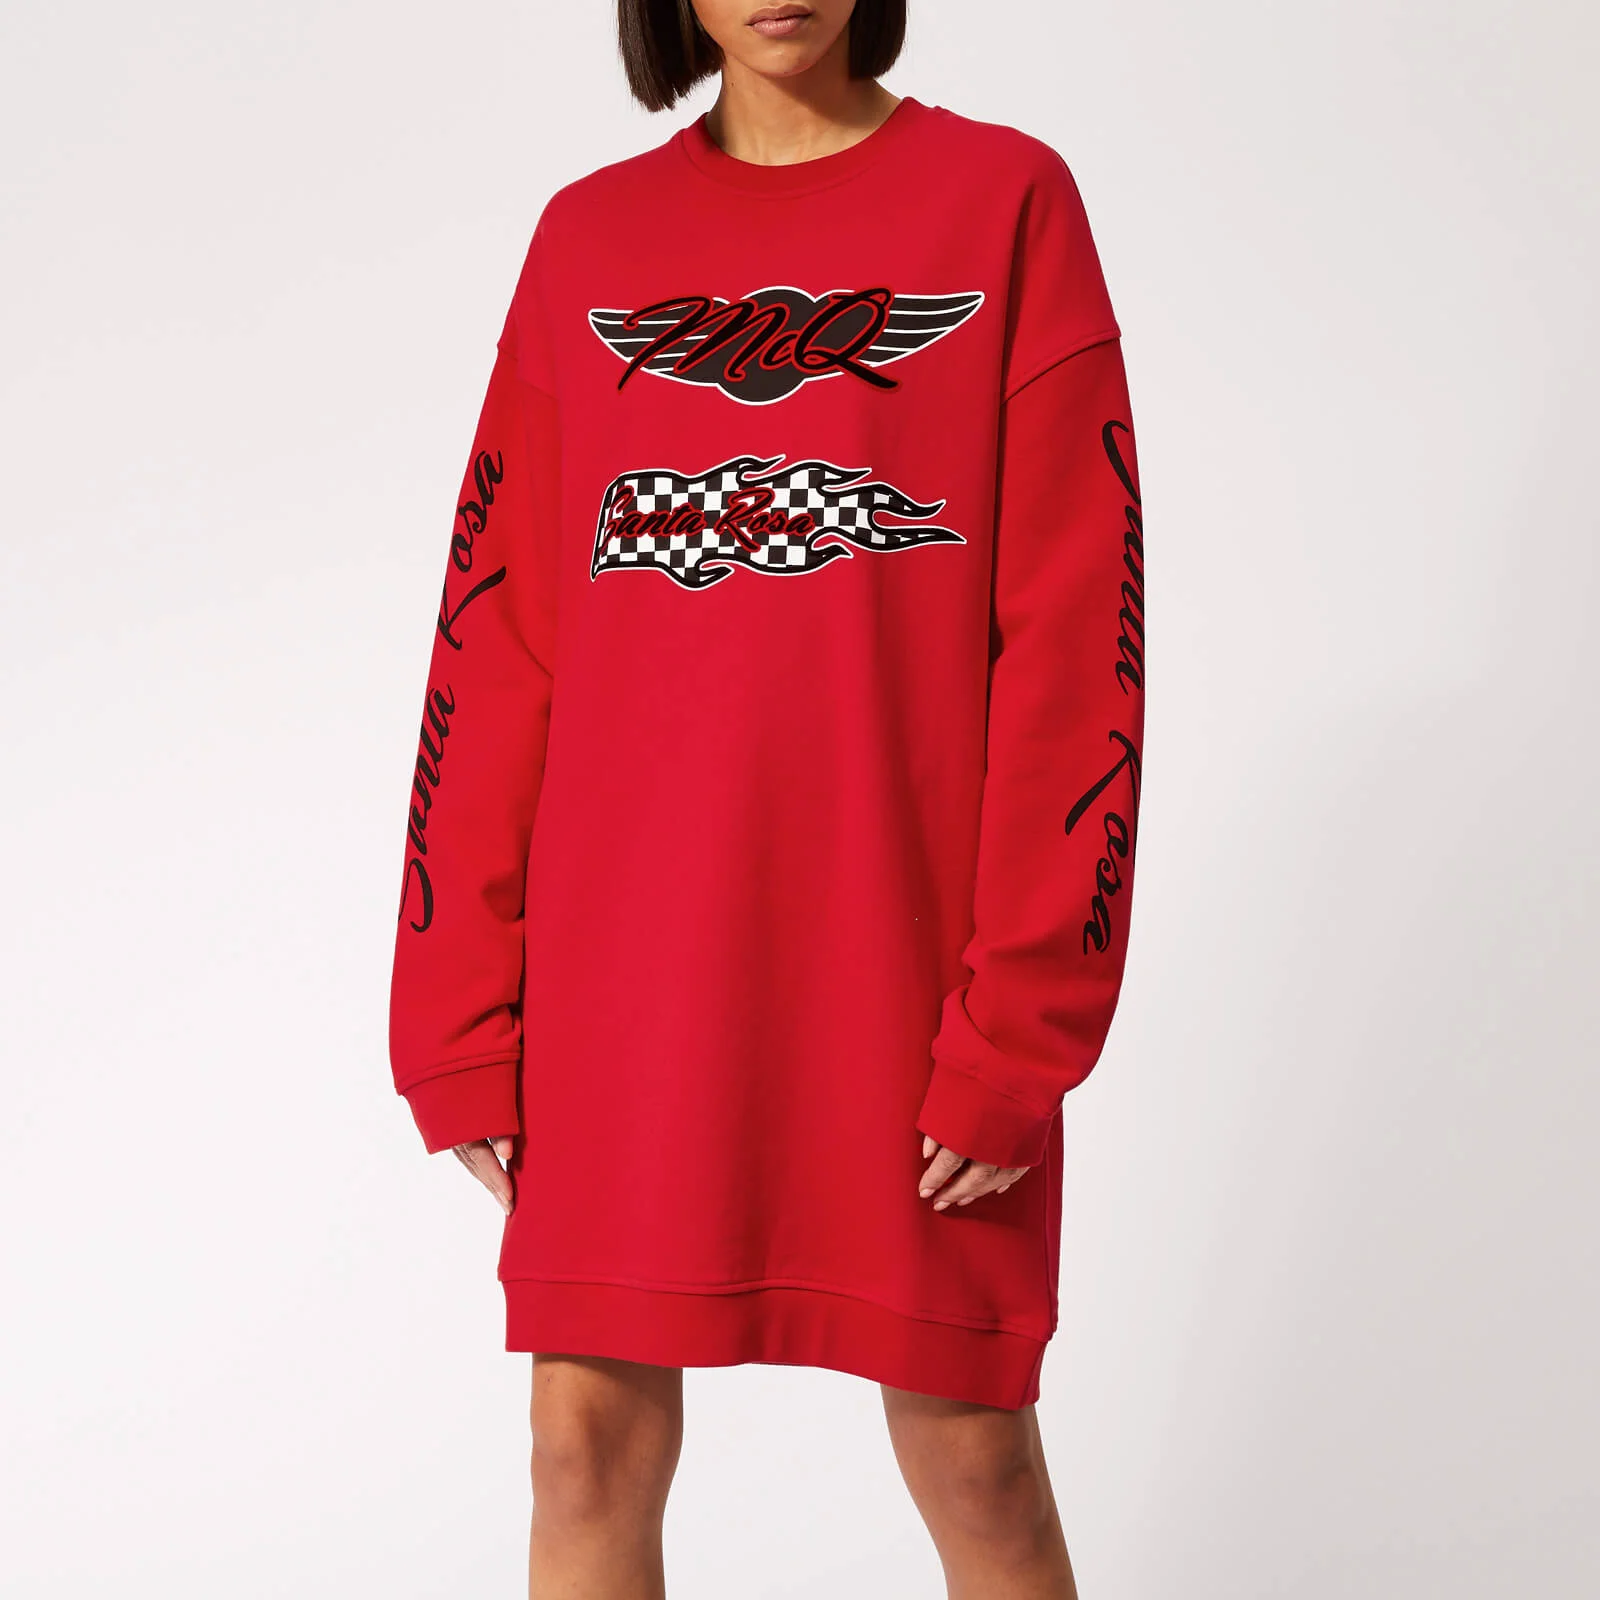 McQ Alexander McQueen Women's Slouchy Sweat Dress - Cadillac Red Image 1